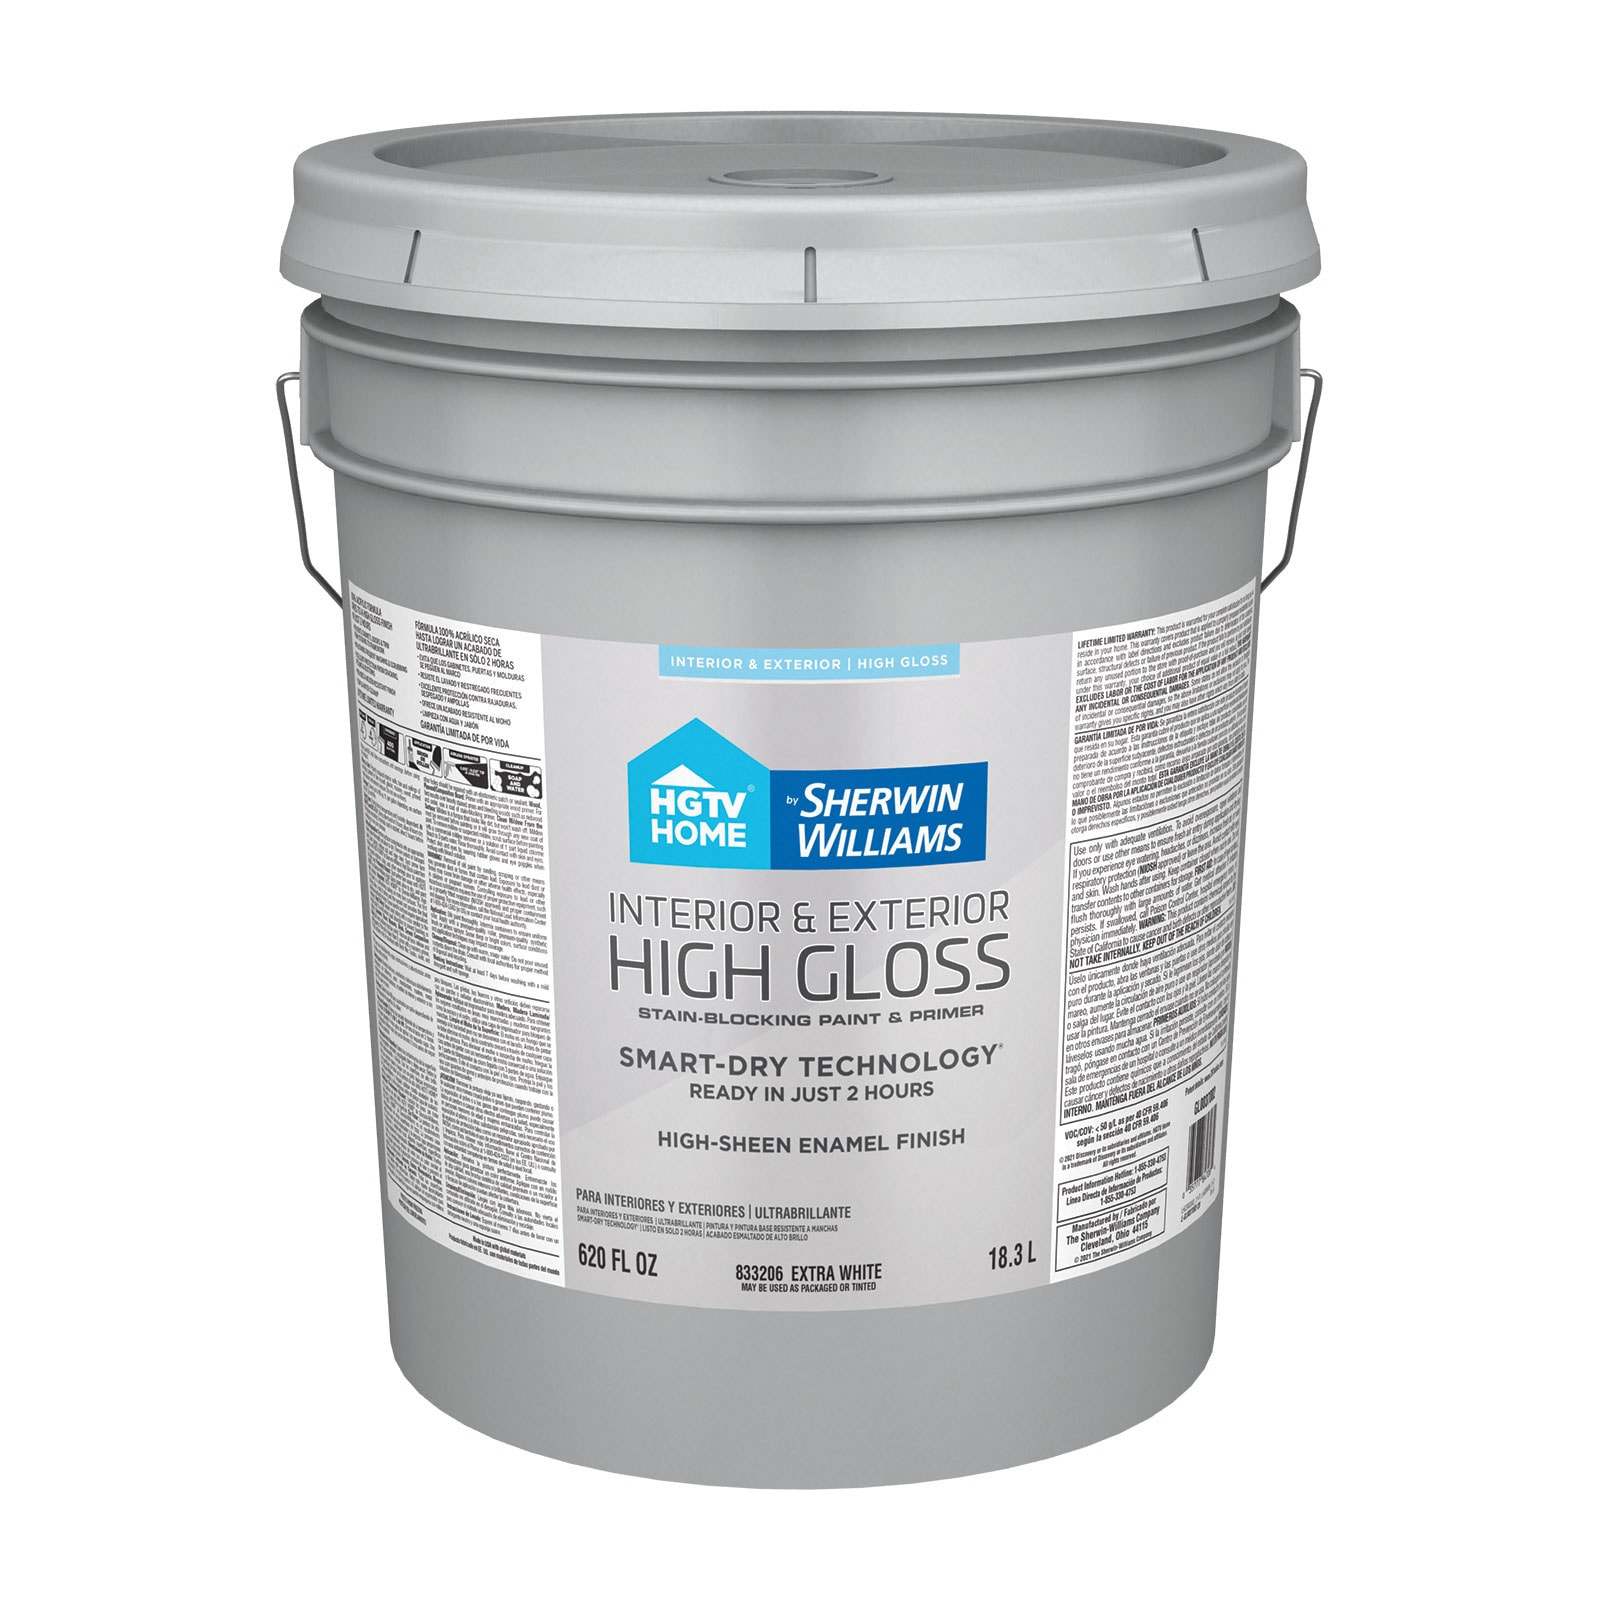 Sherwin-Williams Paint Supplies & Tools in Paint 